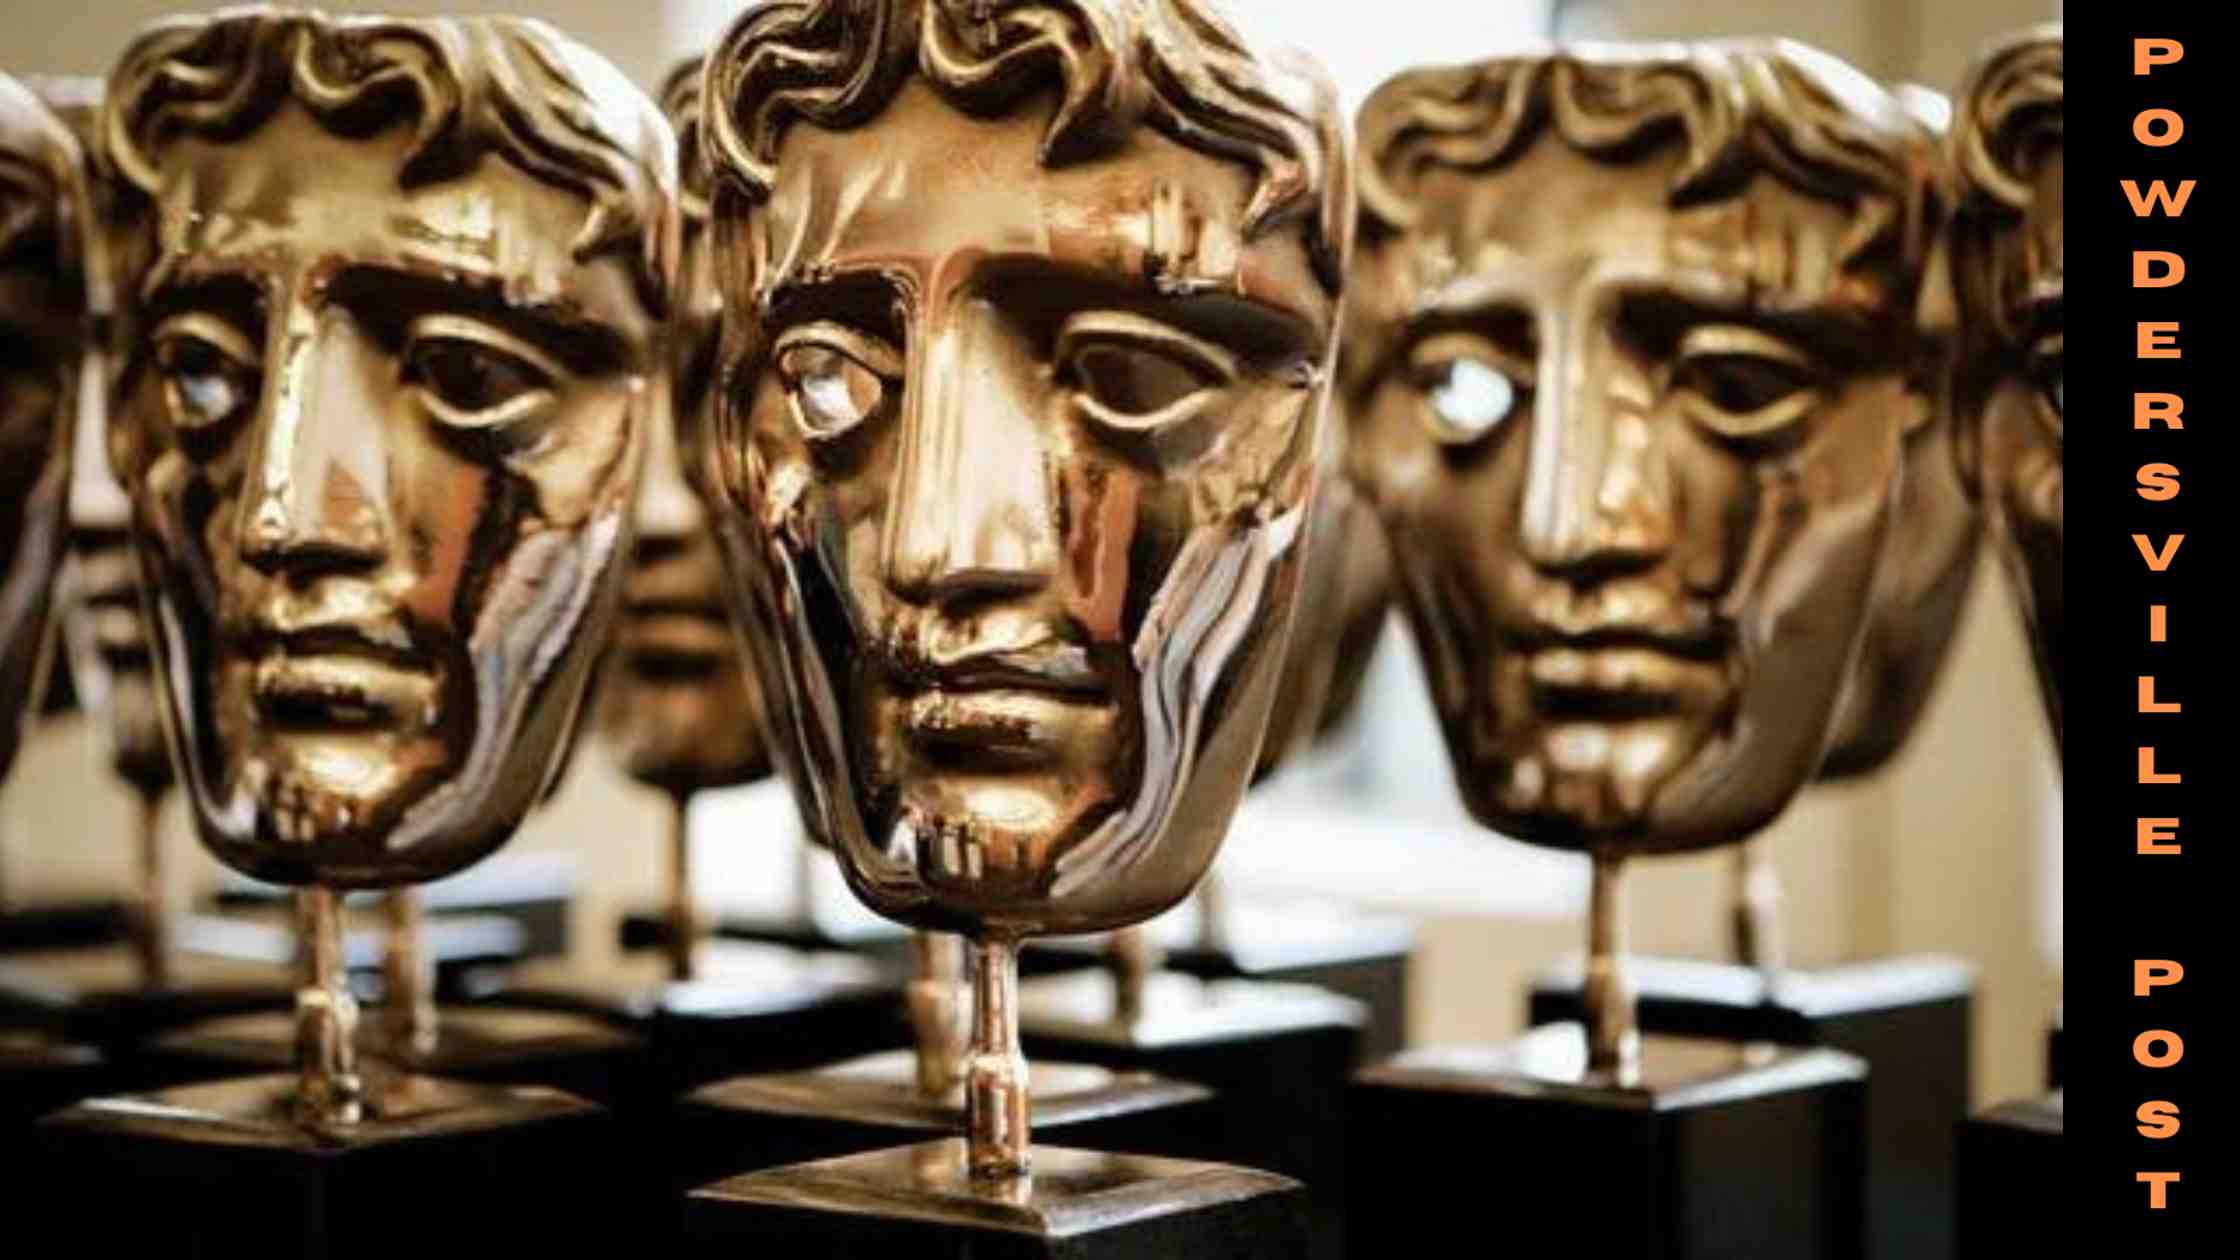 The Power Of The Dog Wins Big!!! See The List Of Complete Winners Of The BAFTA Film Awards 2022